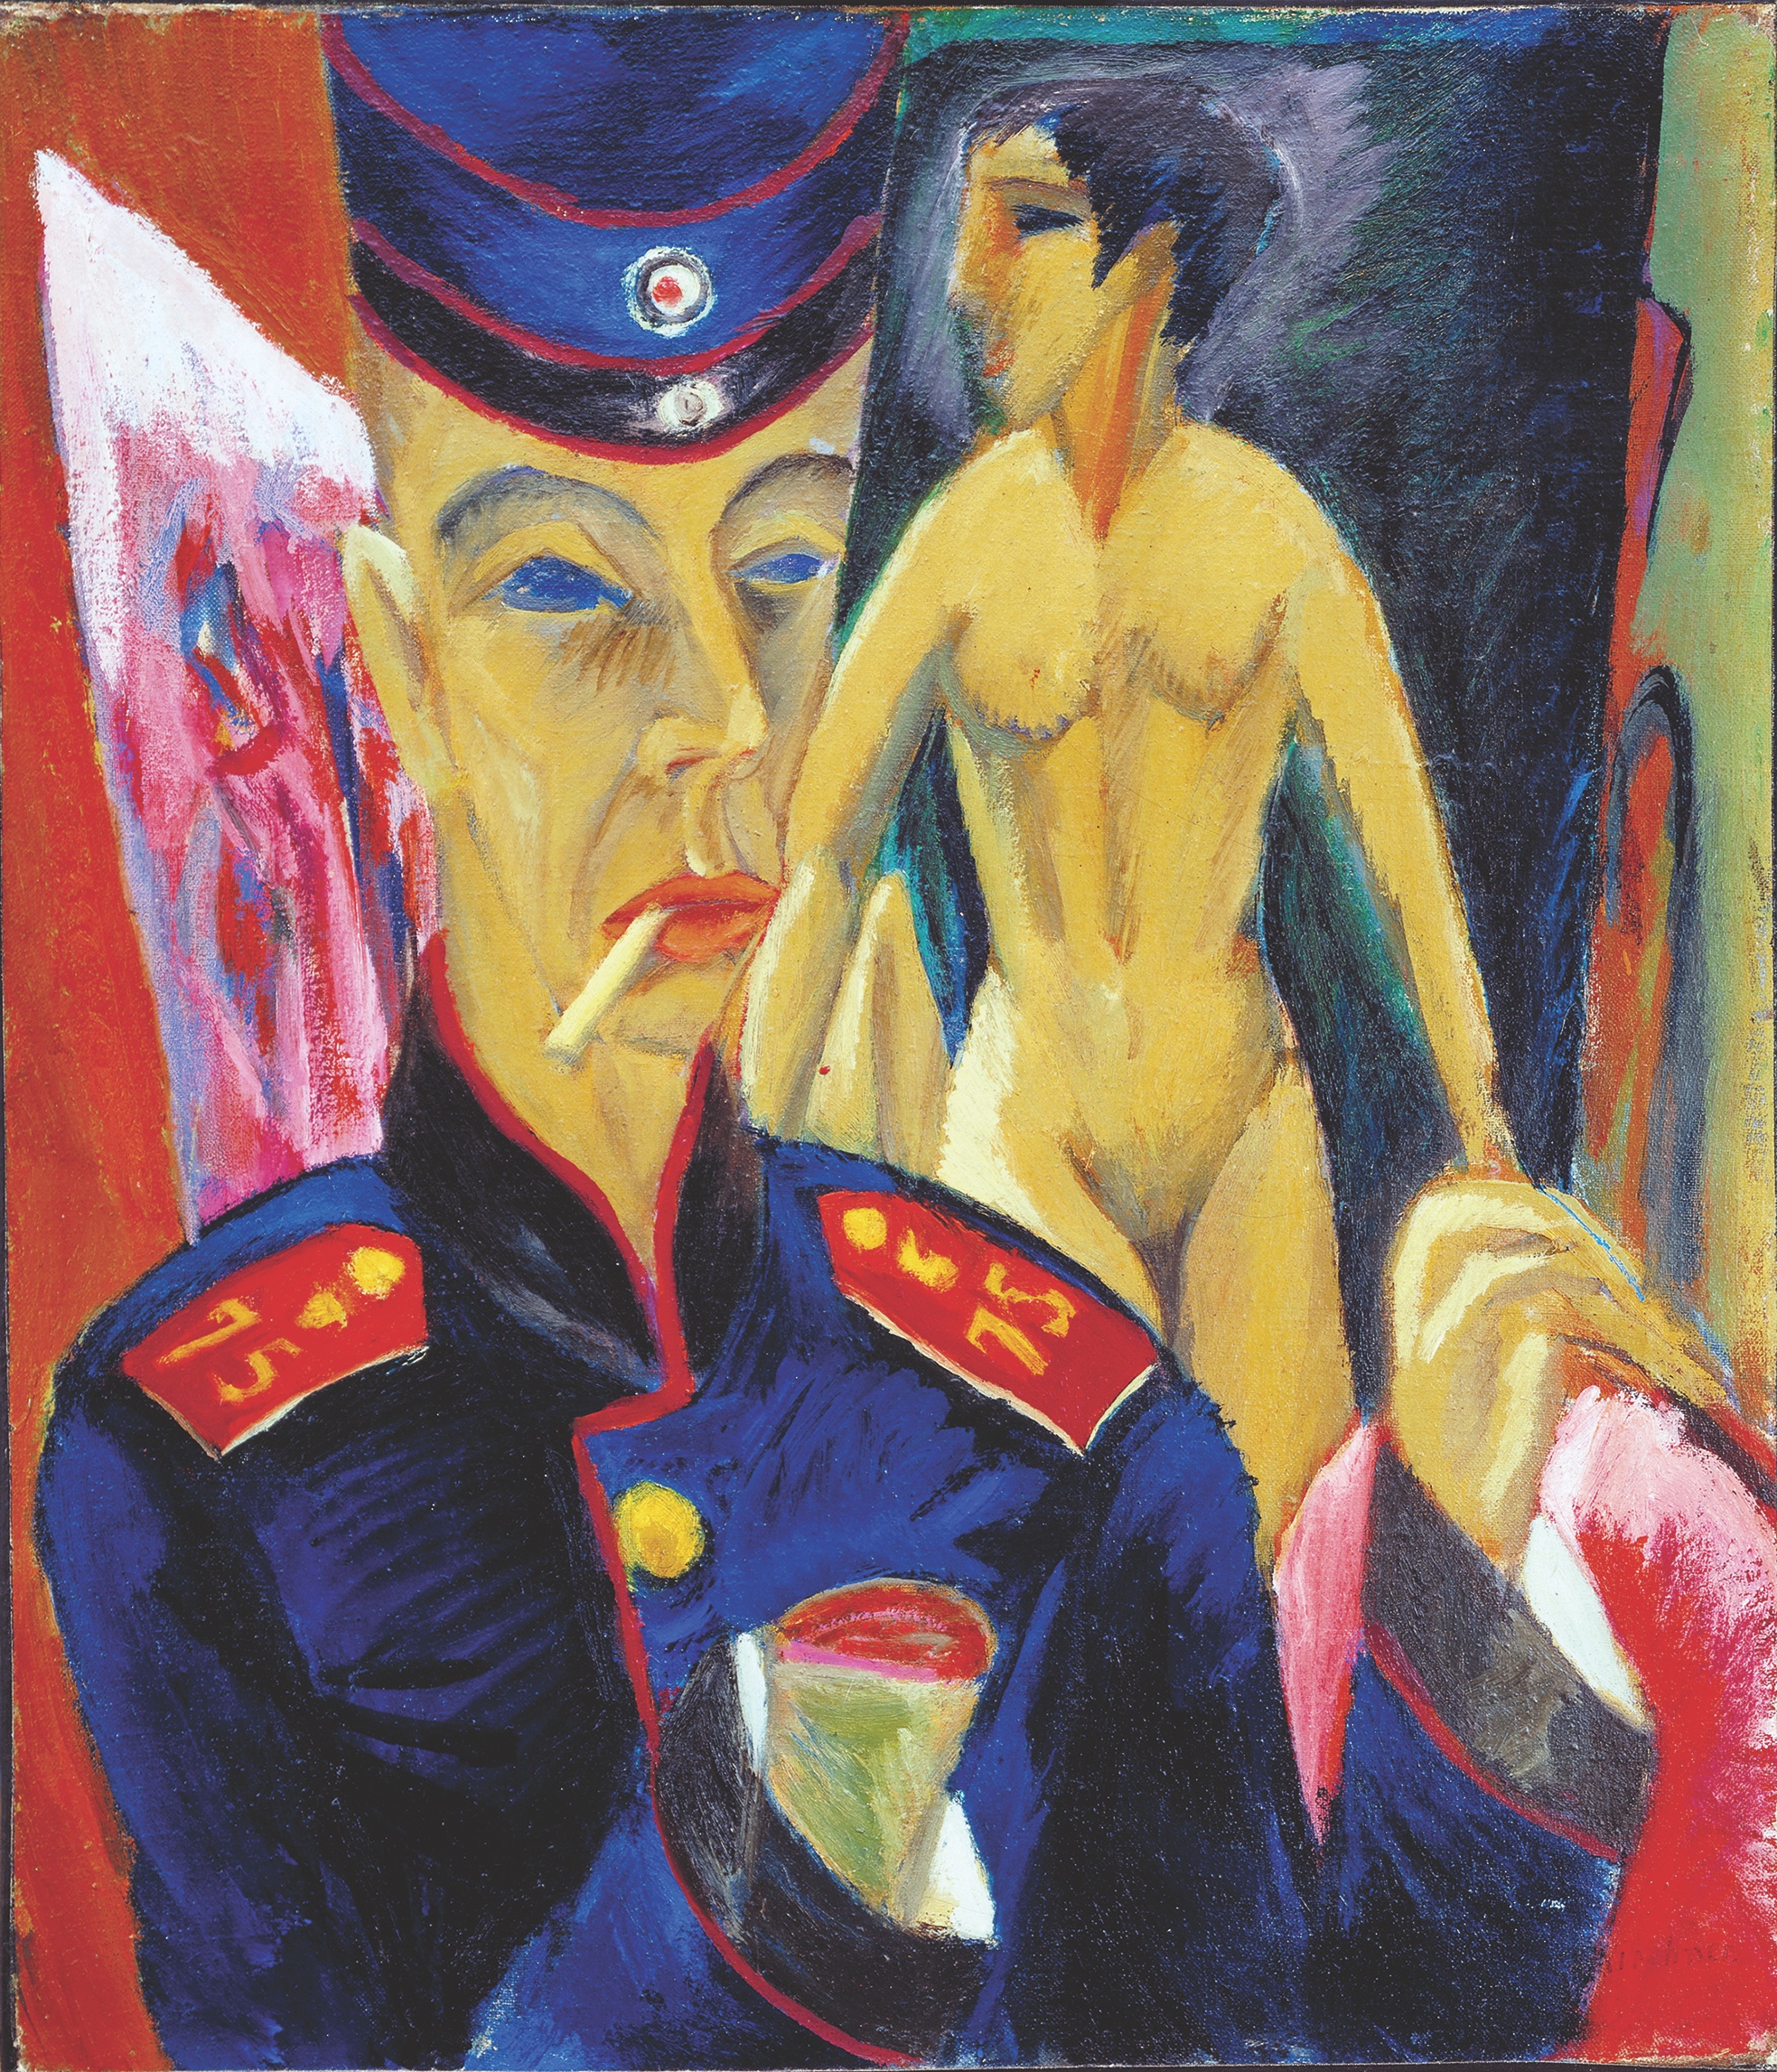 Nazi officials included Ernst Ludwig Kirchner’s Self-Portrait as a Soldier in an exhibition of “degenerate art” in Munich in 1937, retitling the work Soldat mit Dirne (Soldier with Whore). (Charles F. Olney Fund, Allen Memorial Art Museum, Oberlin College, Ohio)